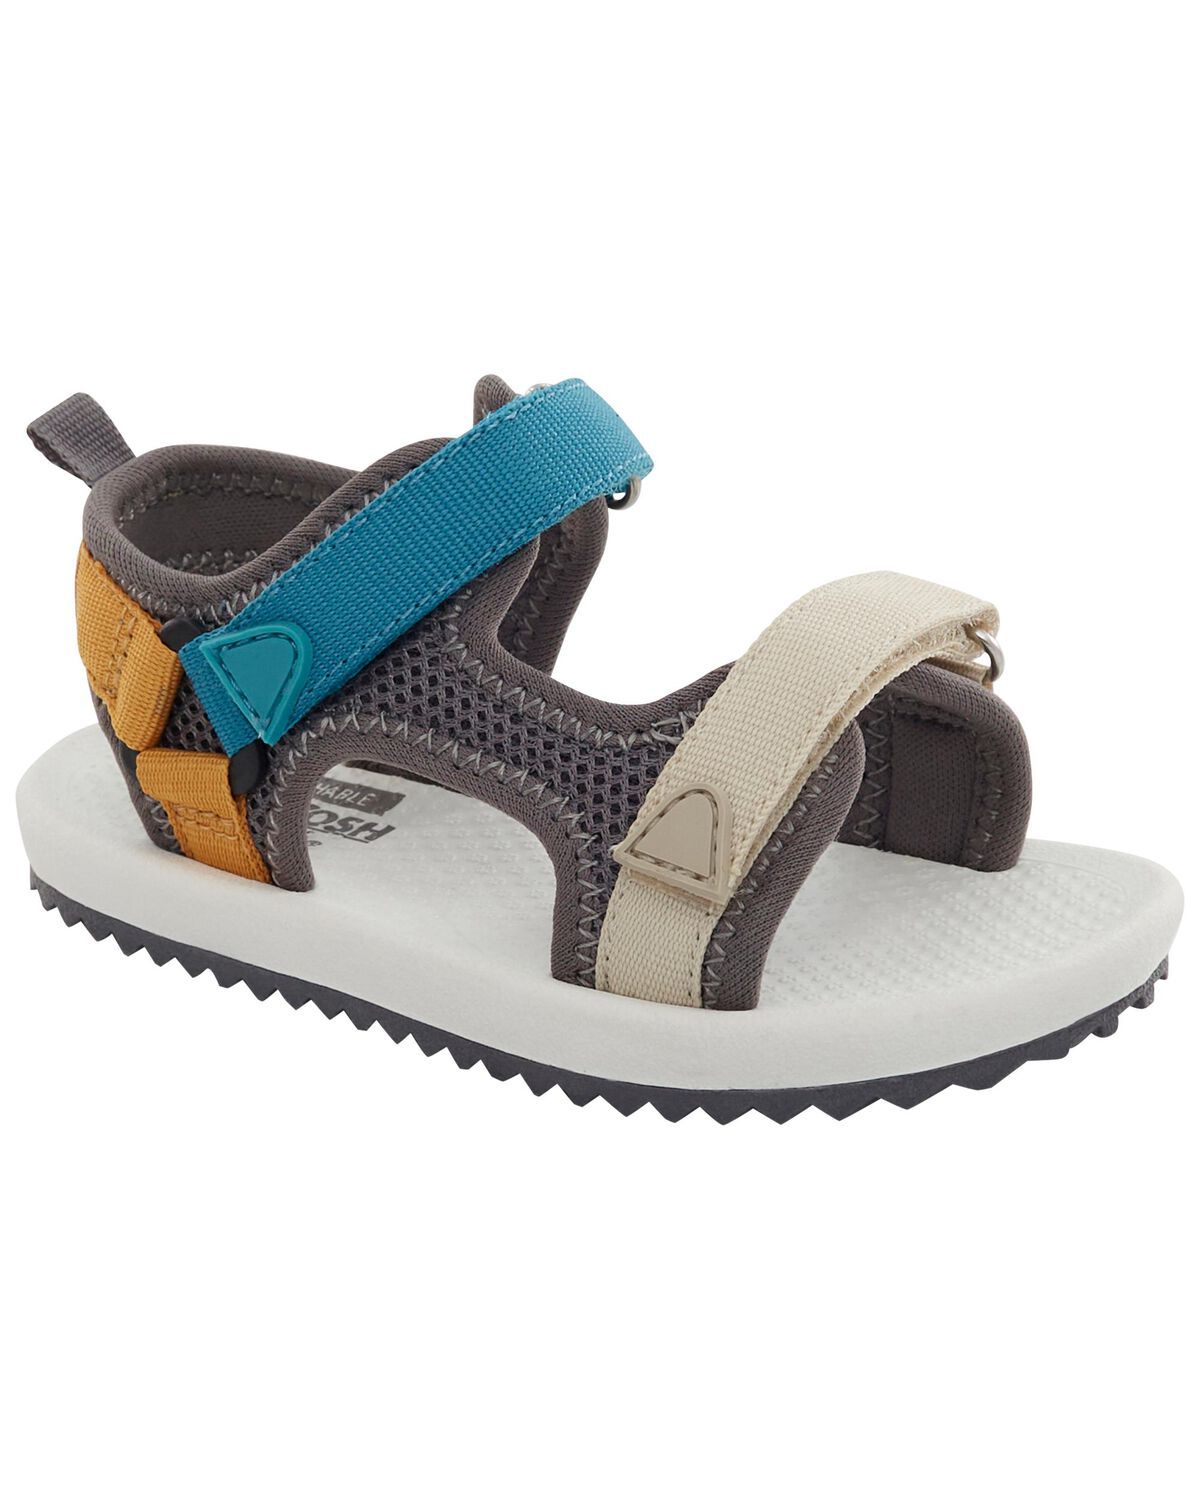 Toddler Casual Sandals | Carter's